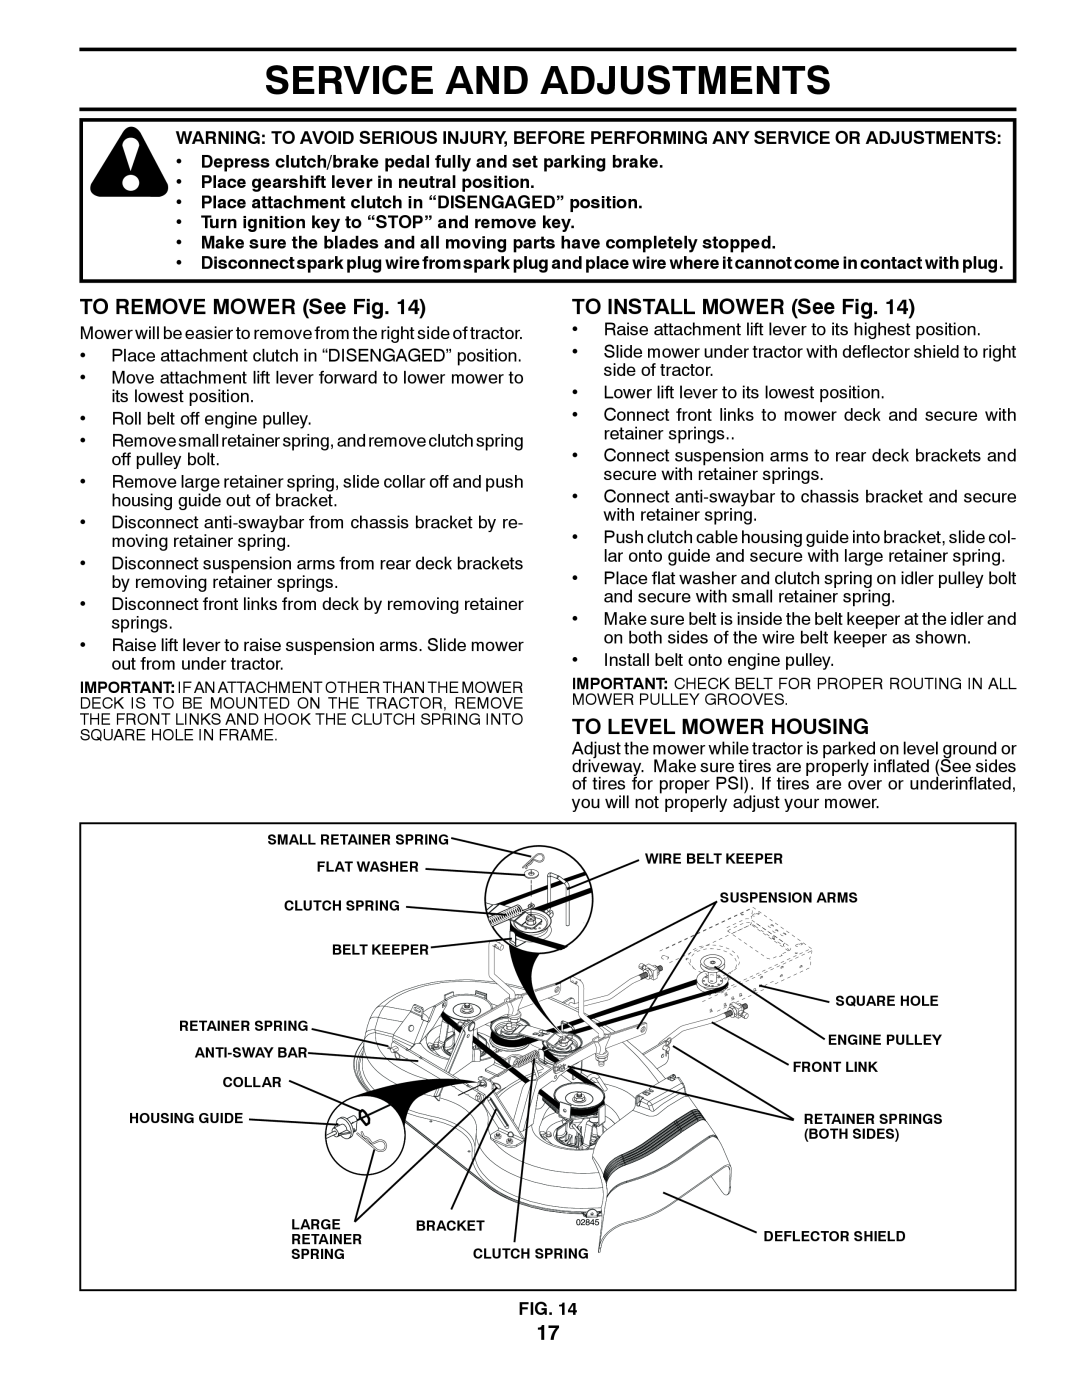 Poulan PXT12538, 431147 Service And Adjustments, TO REMOVE MOWER See Fig, TO INSTALL MOWER See Fig, To Level Mower Housing 